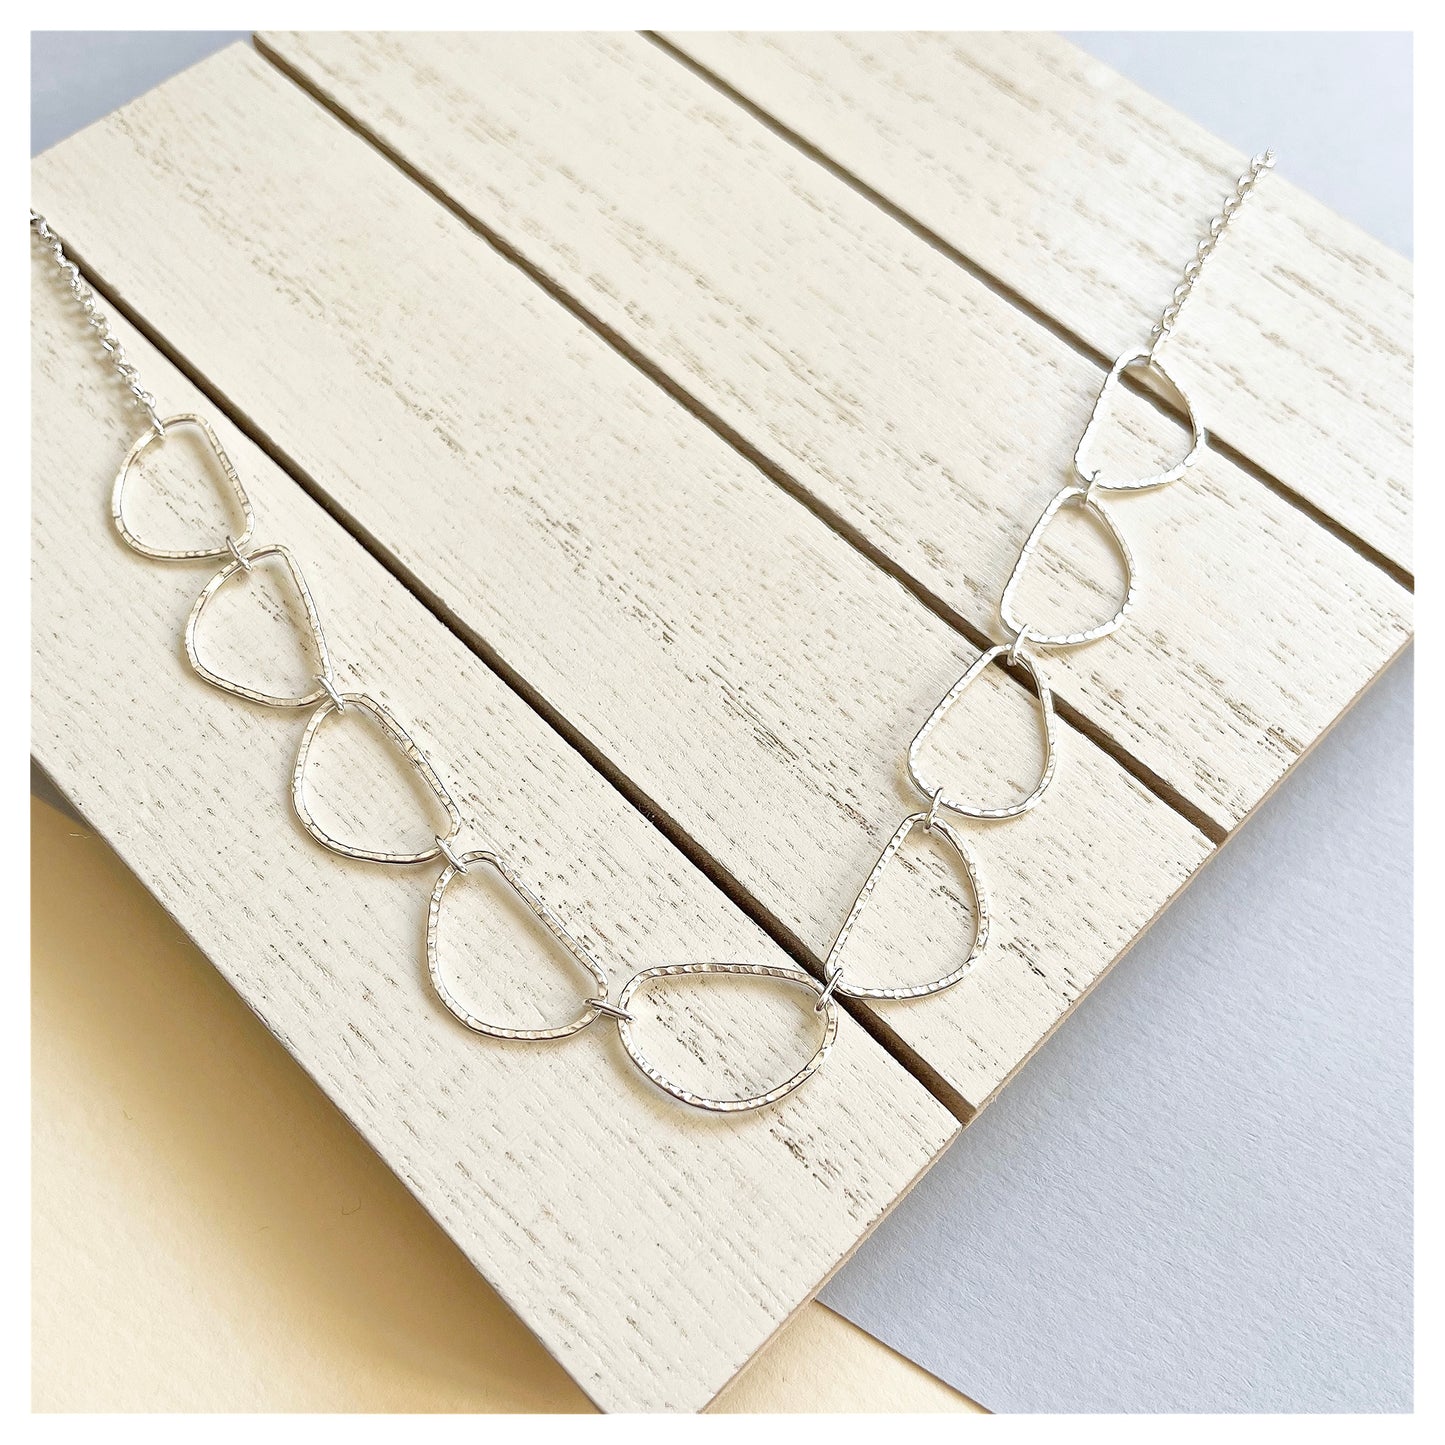 Sterling Silver Small Organic Link Chain Necklace.